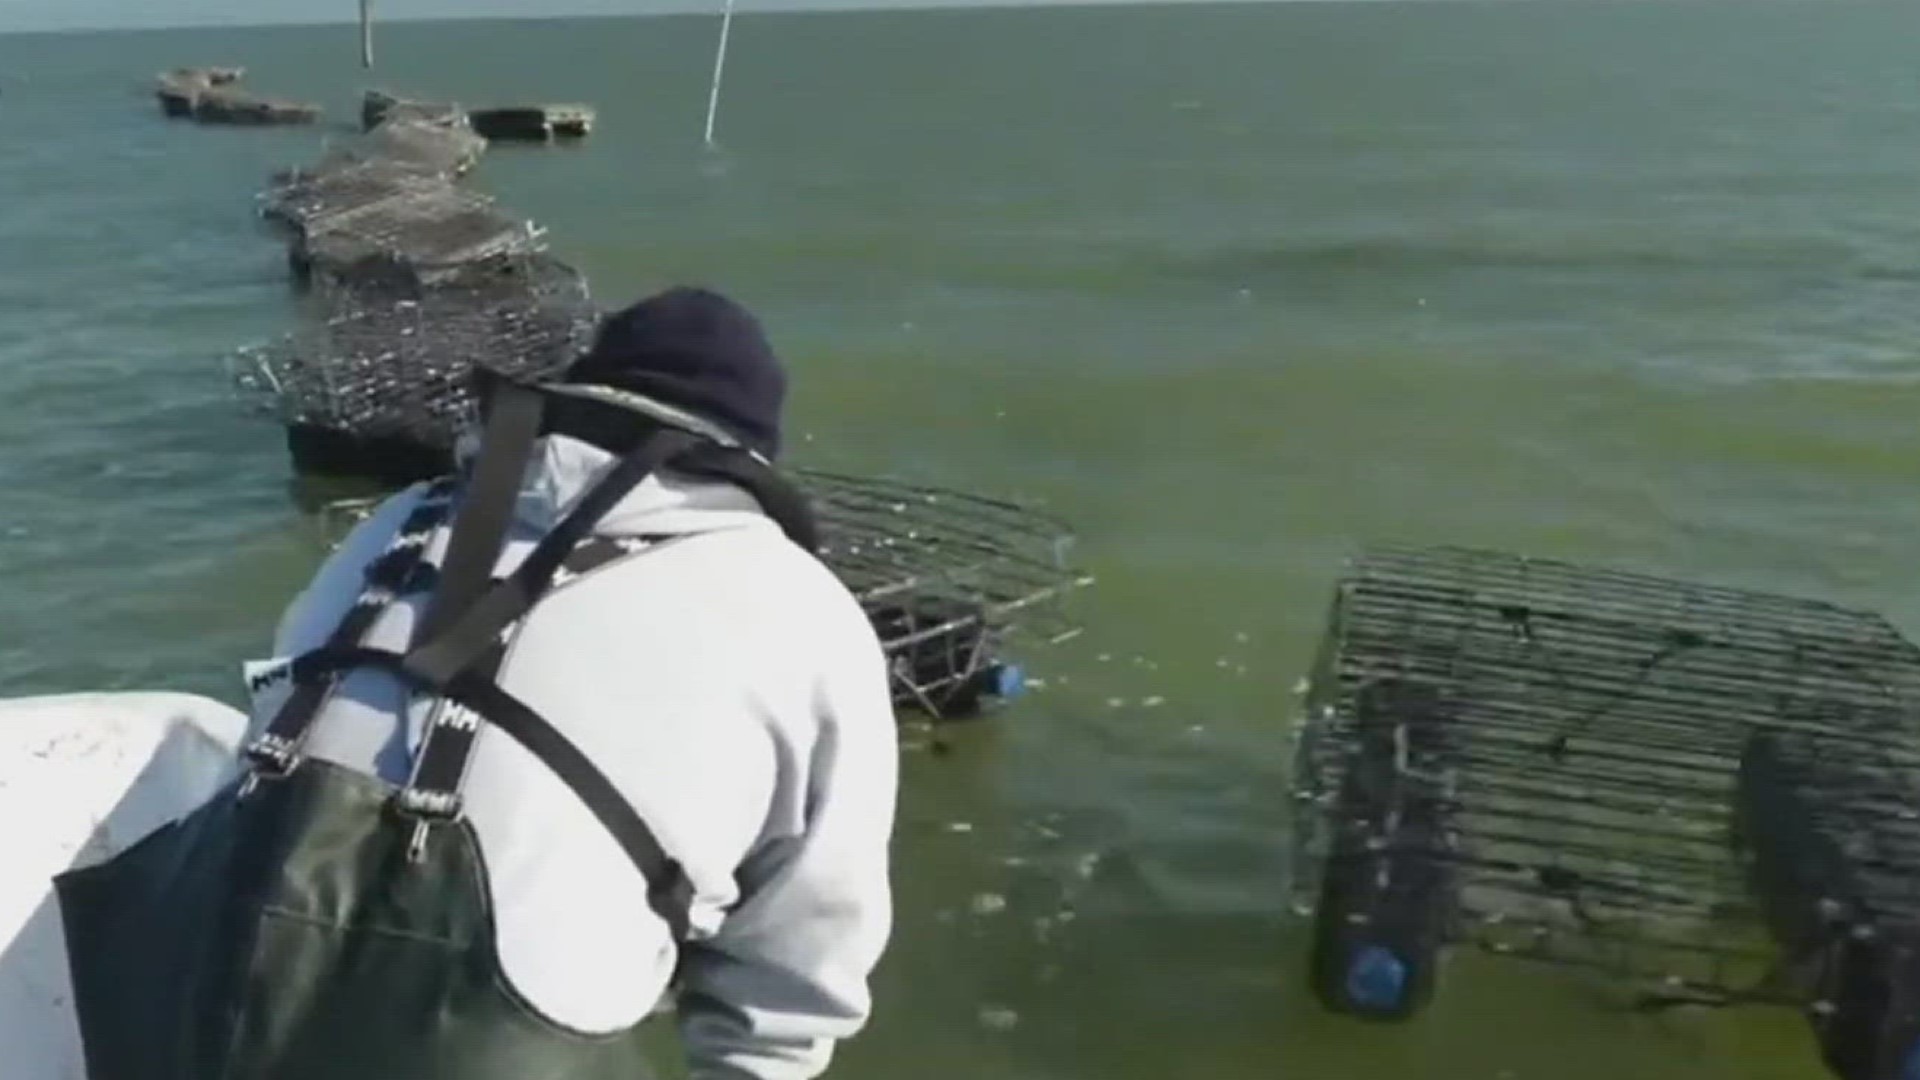 Research shows Texas has lost 90 percent of it's oyster beds to "over farming", pollution and other factors.